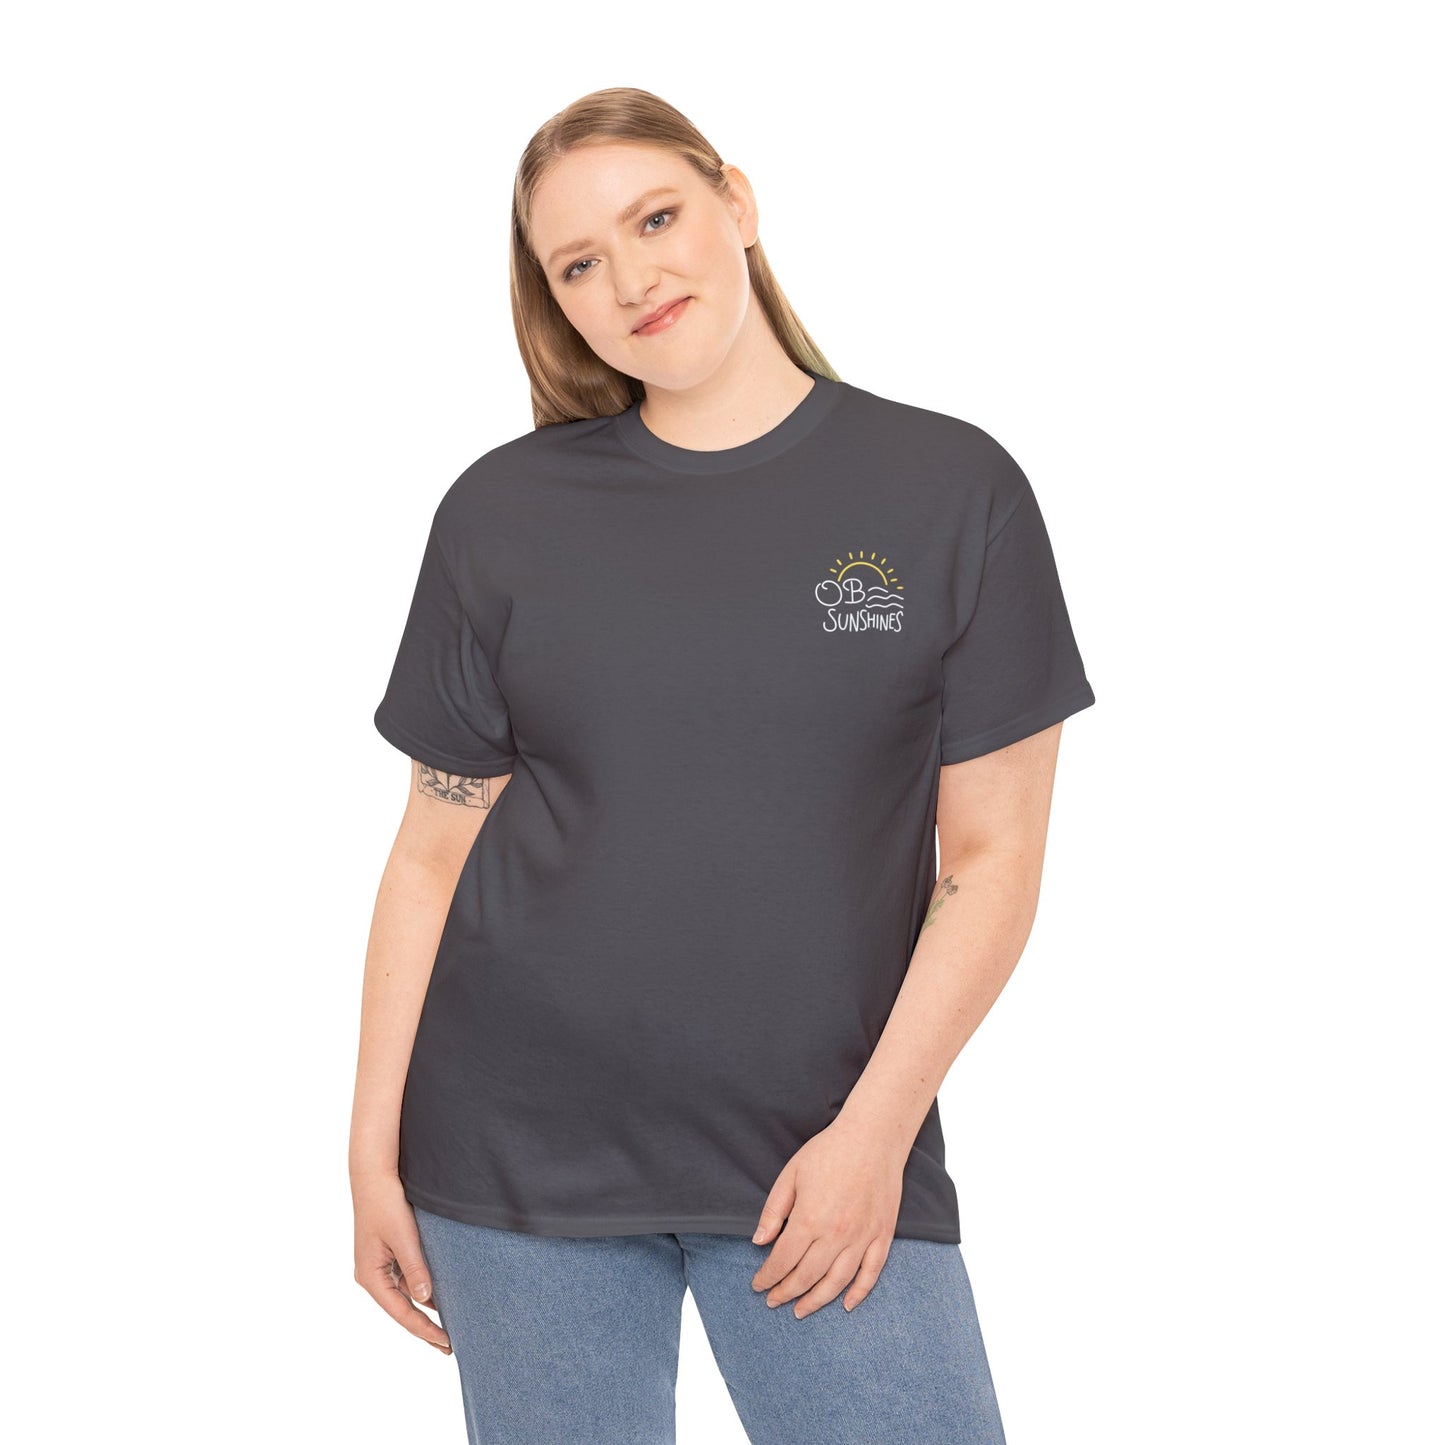 life's at ease with an ocean breeze - marathon tshirt